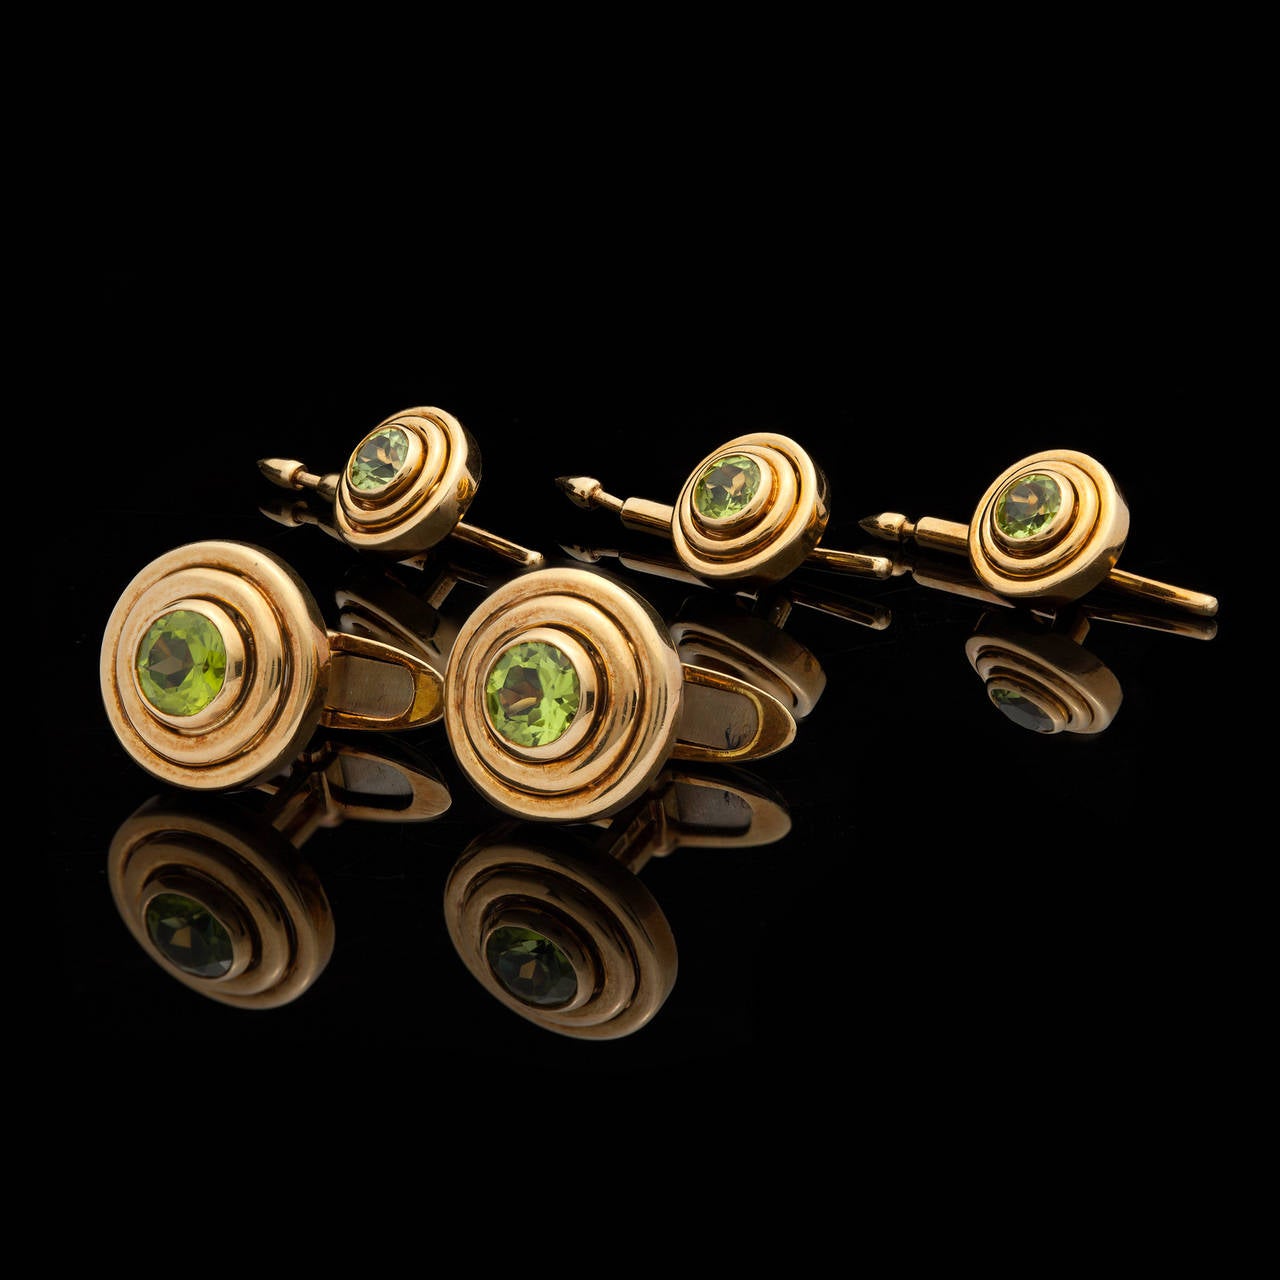 Tiffany & Co. peridot Dress Set Comprised of a encircled swivel back Pair of Cuff Links together with Three plunger style Shirt Studs Set in 18Kt Yellow Gold.